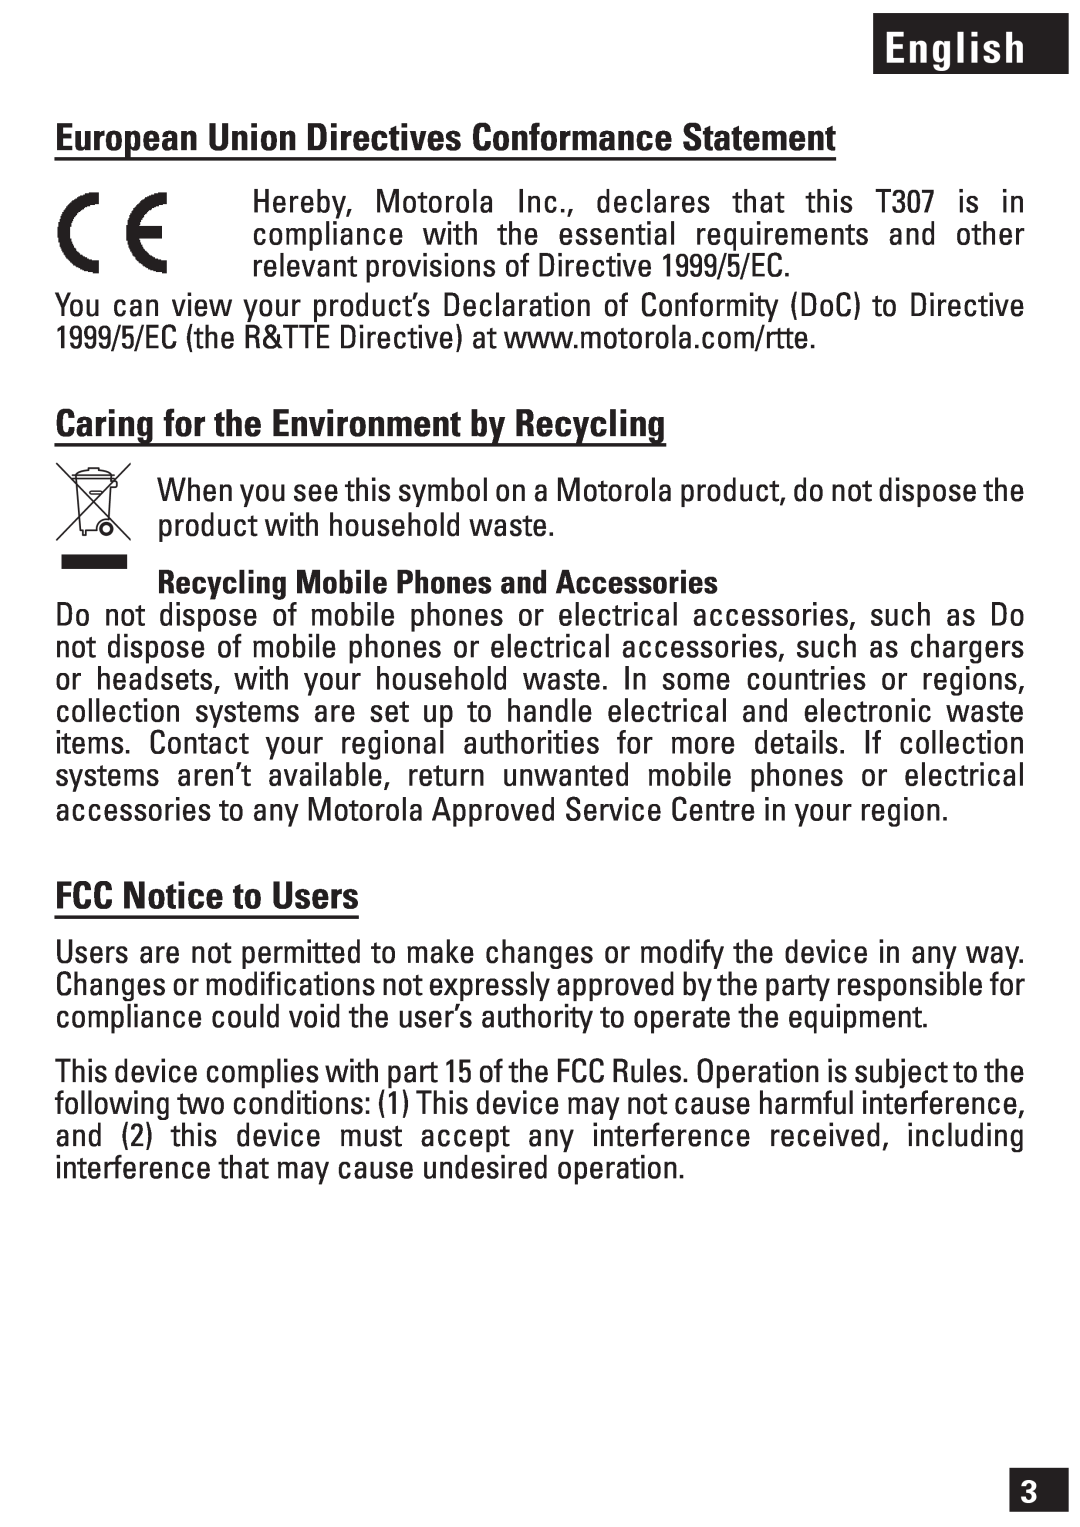 Motorola T307 manual English, European Union Directives Conformance Statement, Caring for the Environment by Recycling 